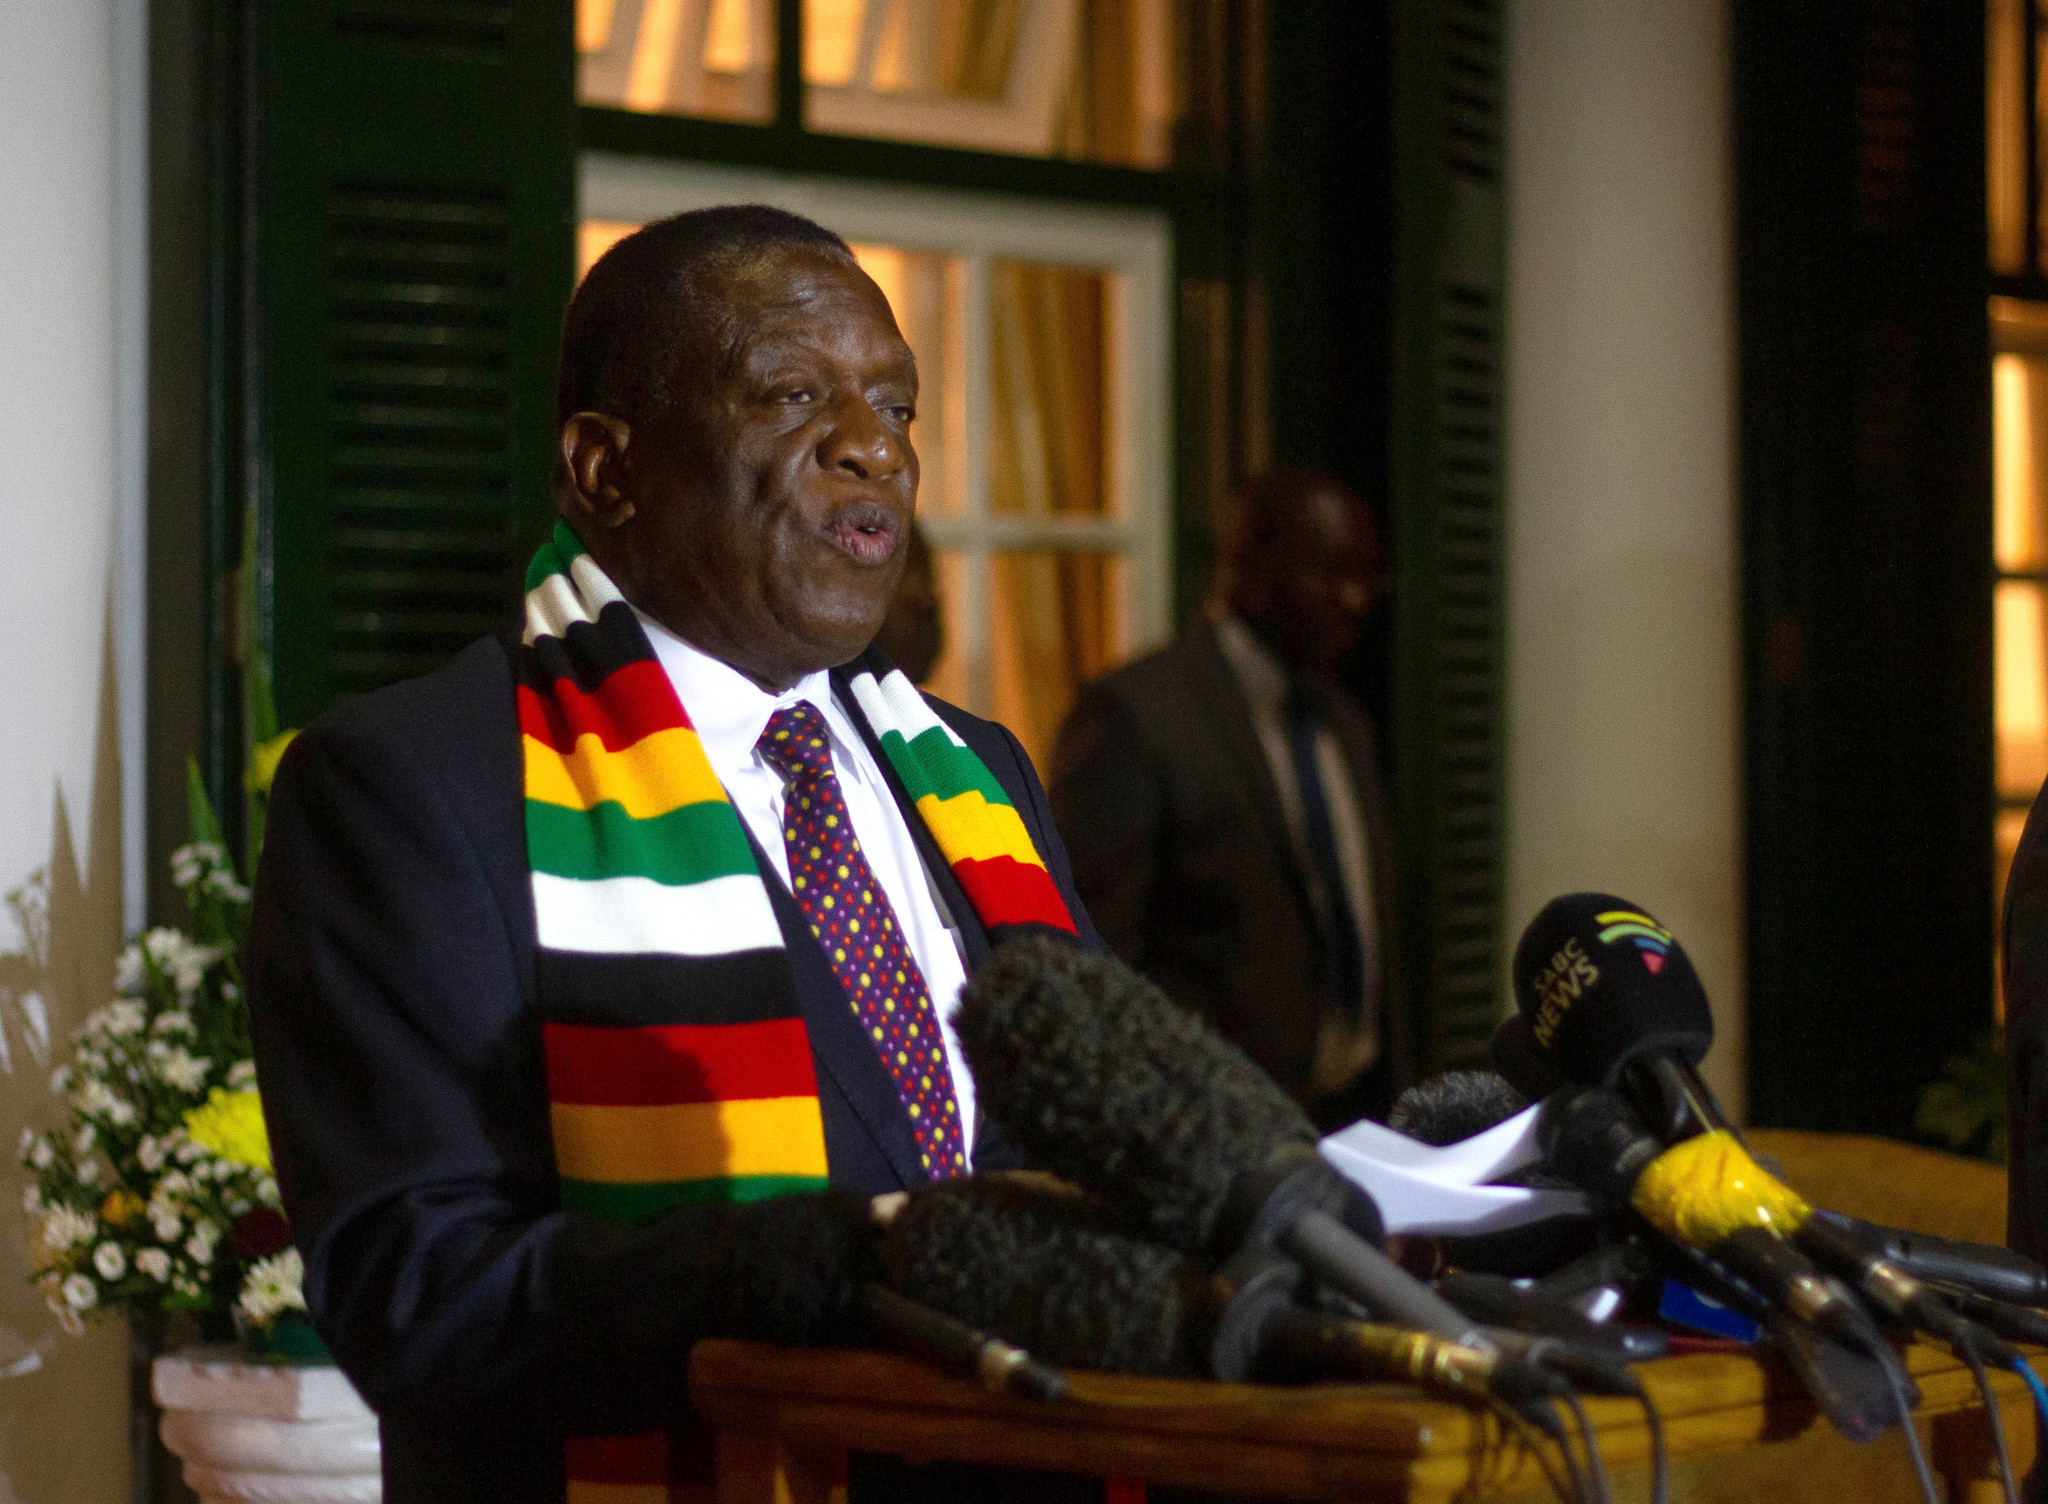 The Zimbabwean Government, led by Emmerson Mnangagwa offered a warm welcome to the delegation for talks regarding potentially staging the 2027 African Games ©Getty Images